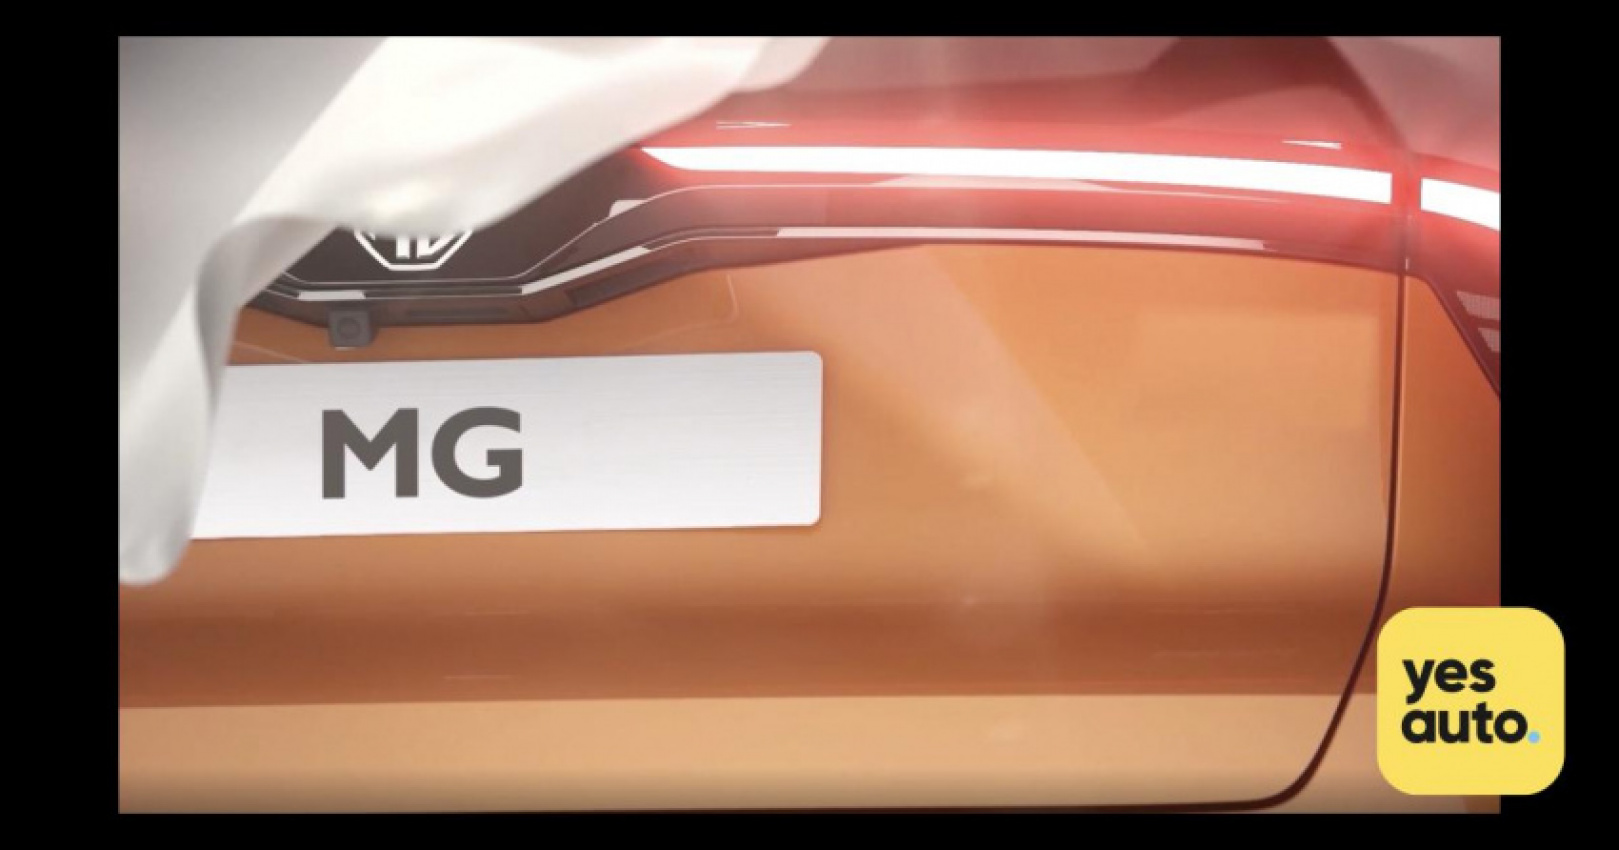 autos, cars, mg, car news, car price, cars on sale, electric vehicle, manufacturer news, the mg 4 electric hatchback has been teased ahead of its full reveal later this year